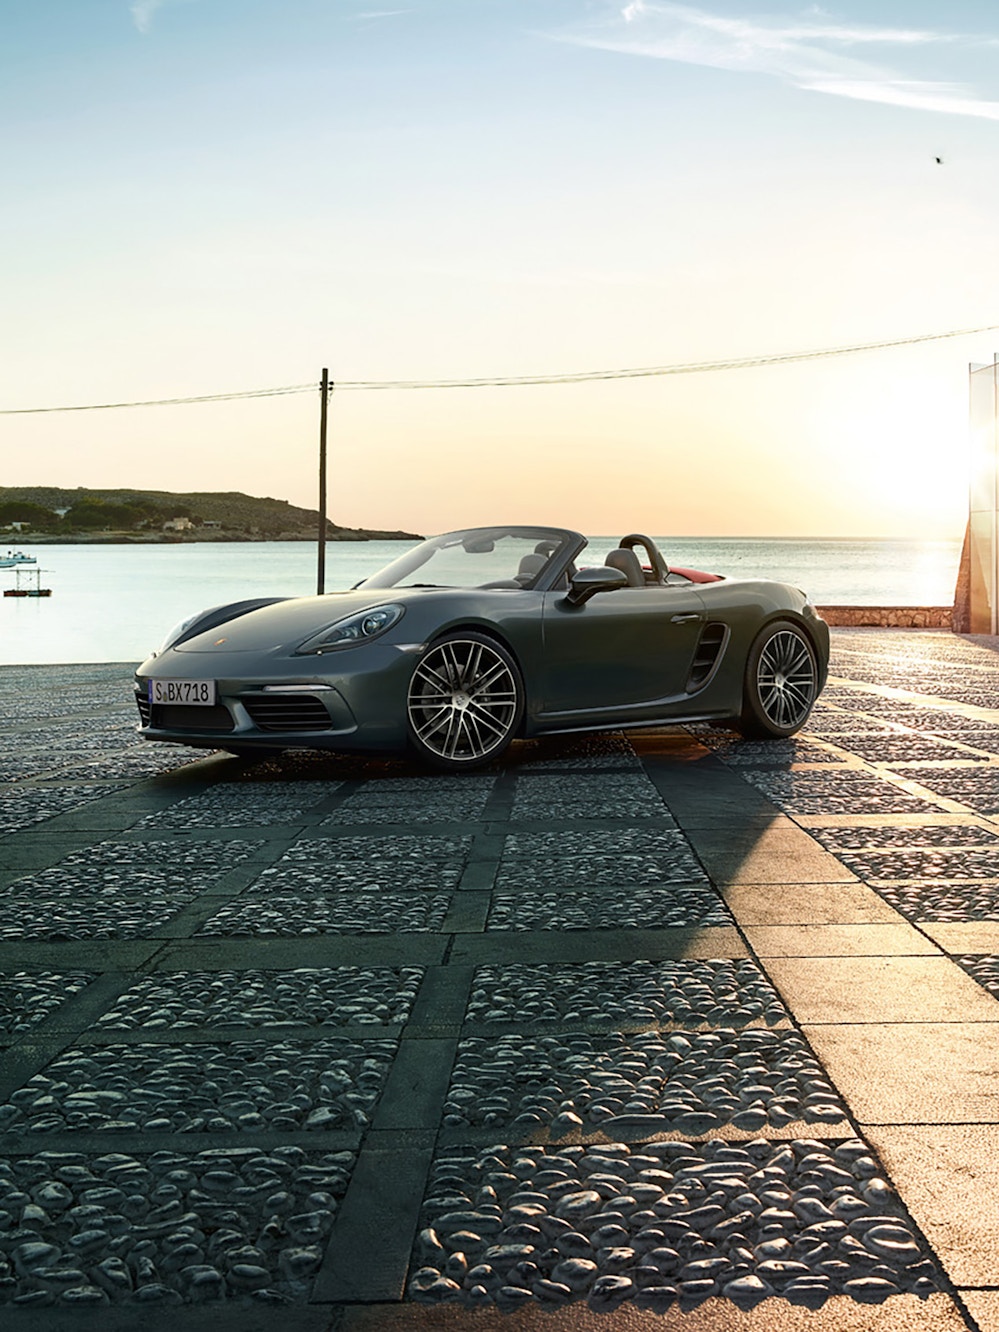 A gray metallic Porsche 718 Boxster vehicle parked outside with a sea view in the background.